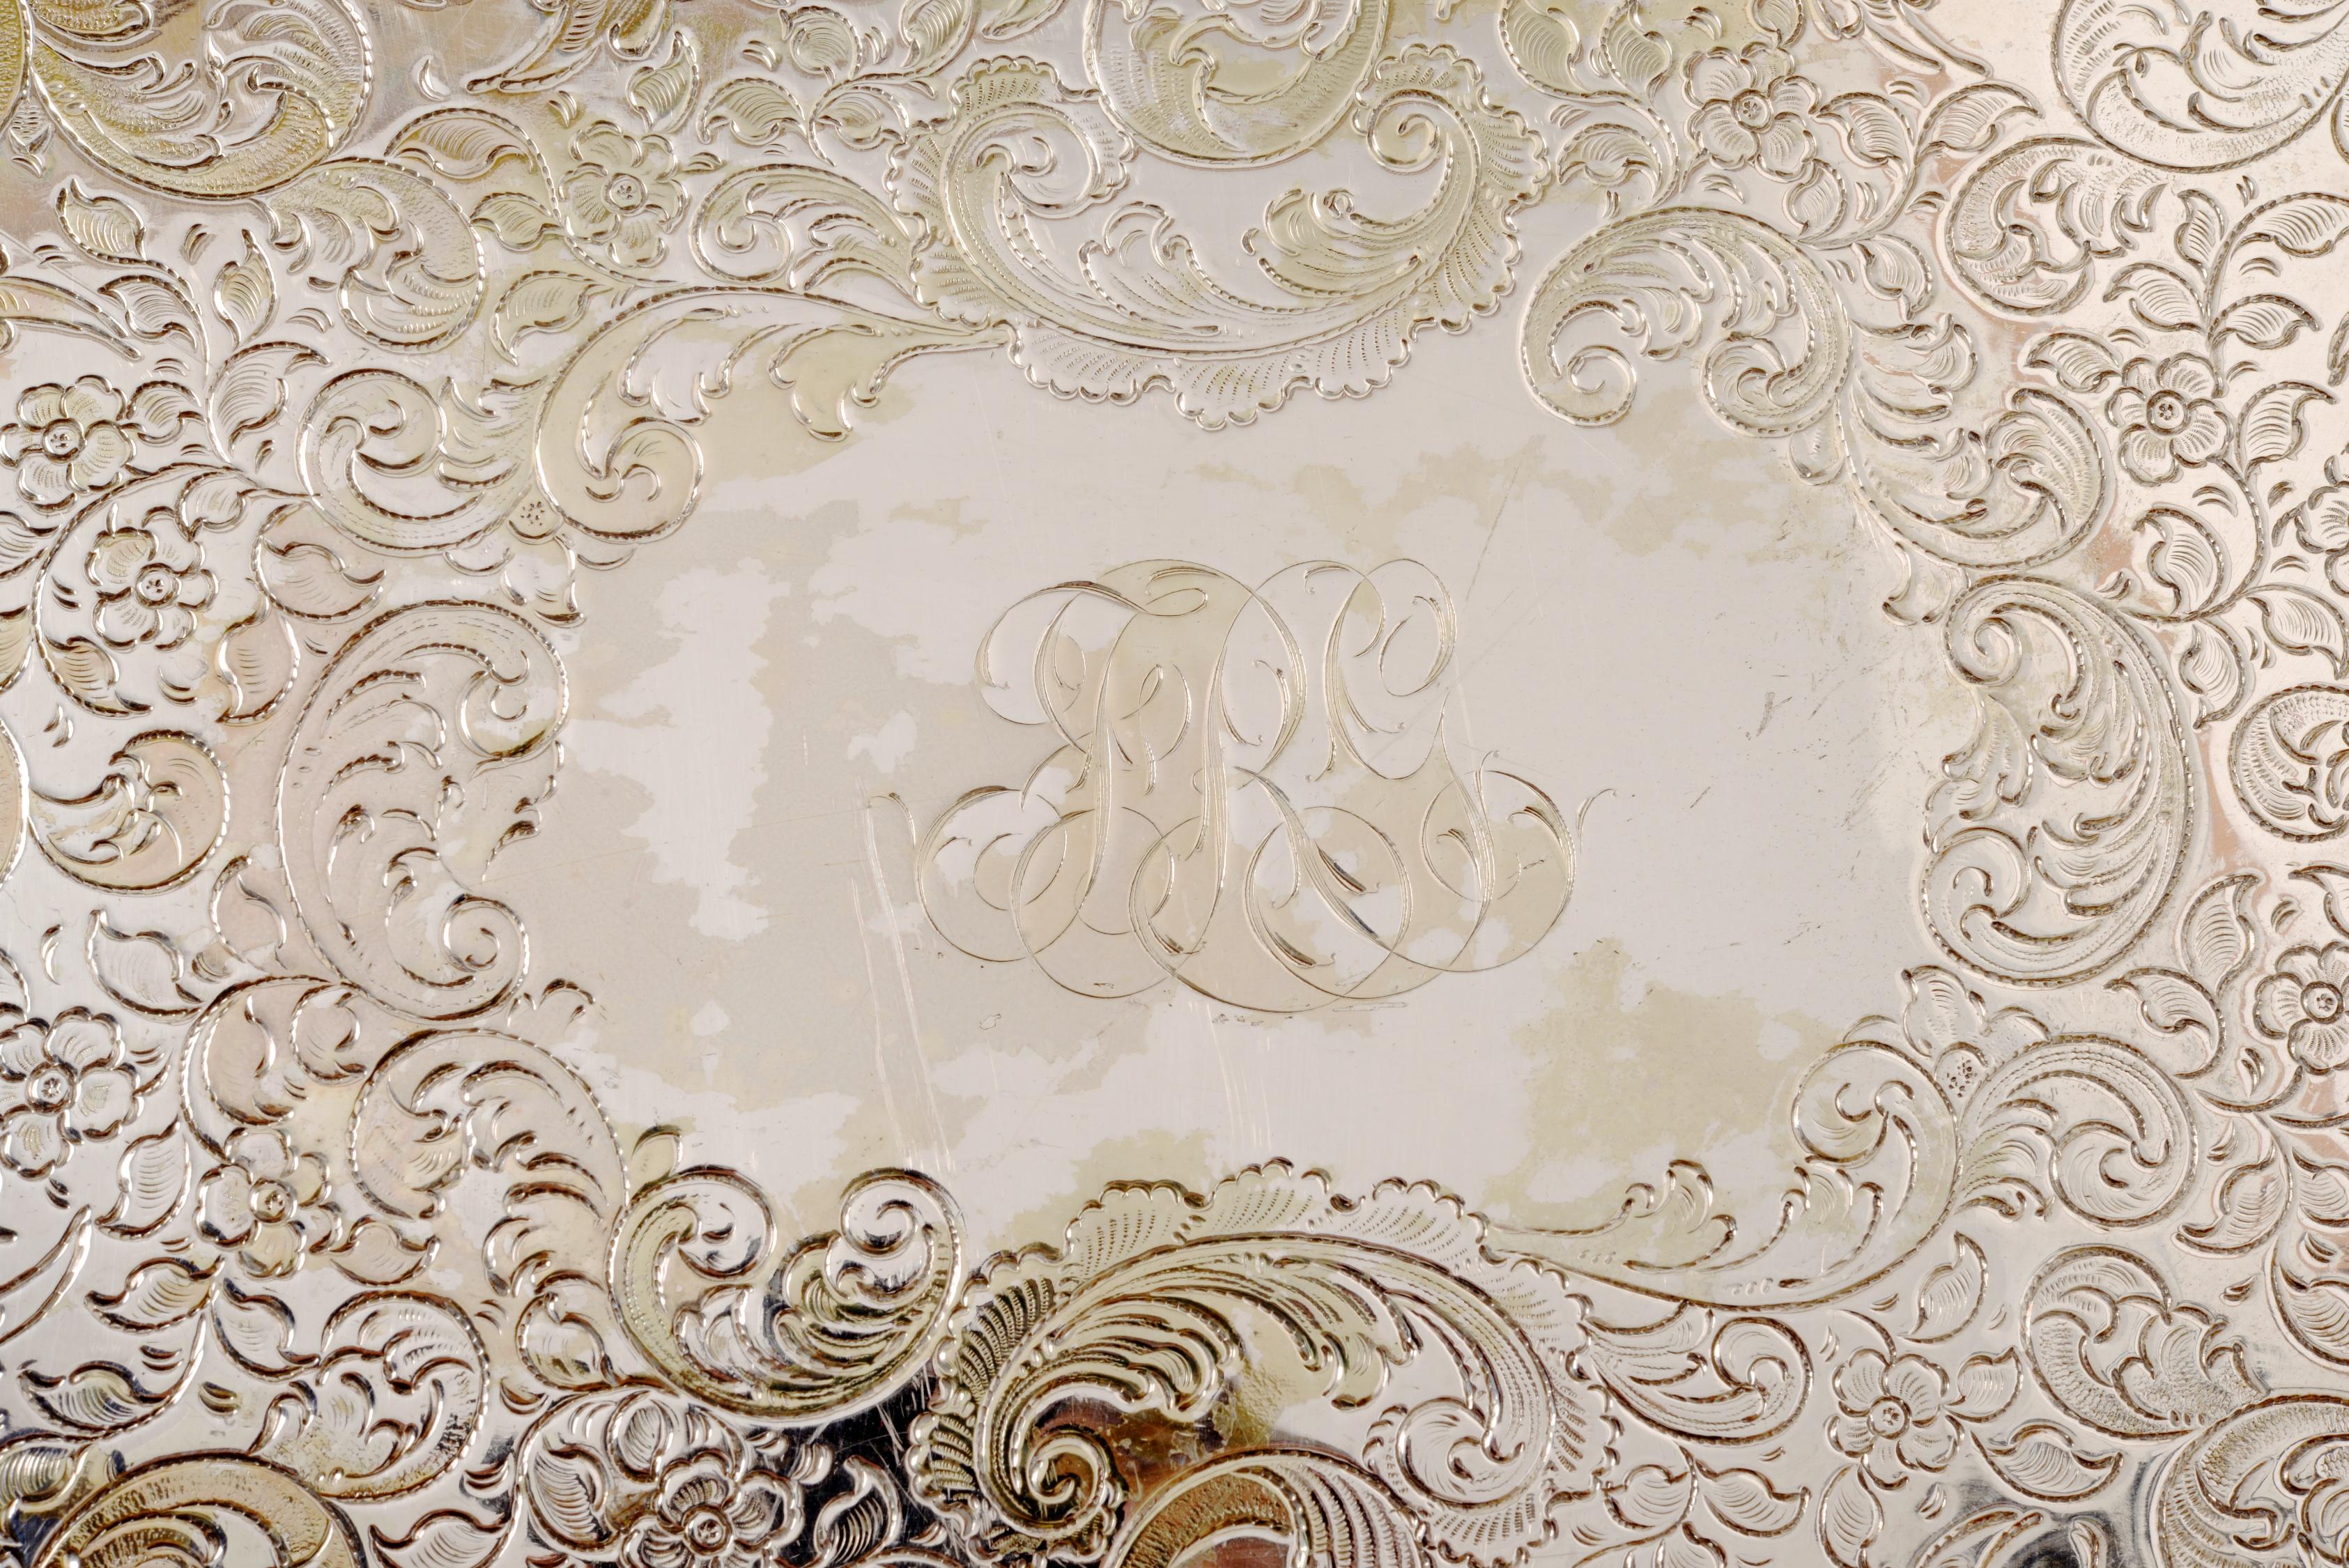 Large Antique Silver Plated Serving Tray with Incised Floral Decoration For Sale 3